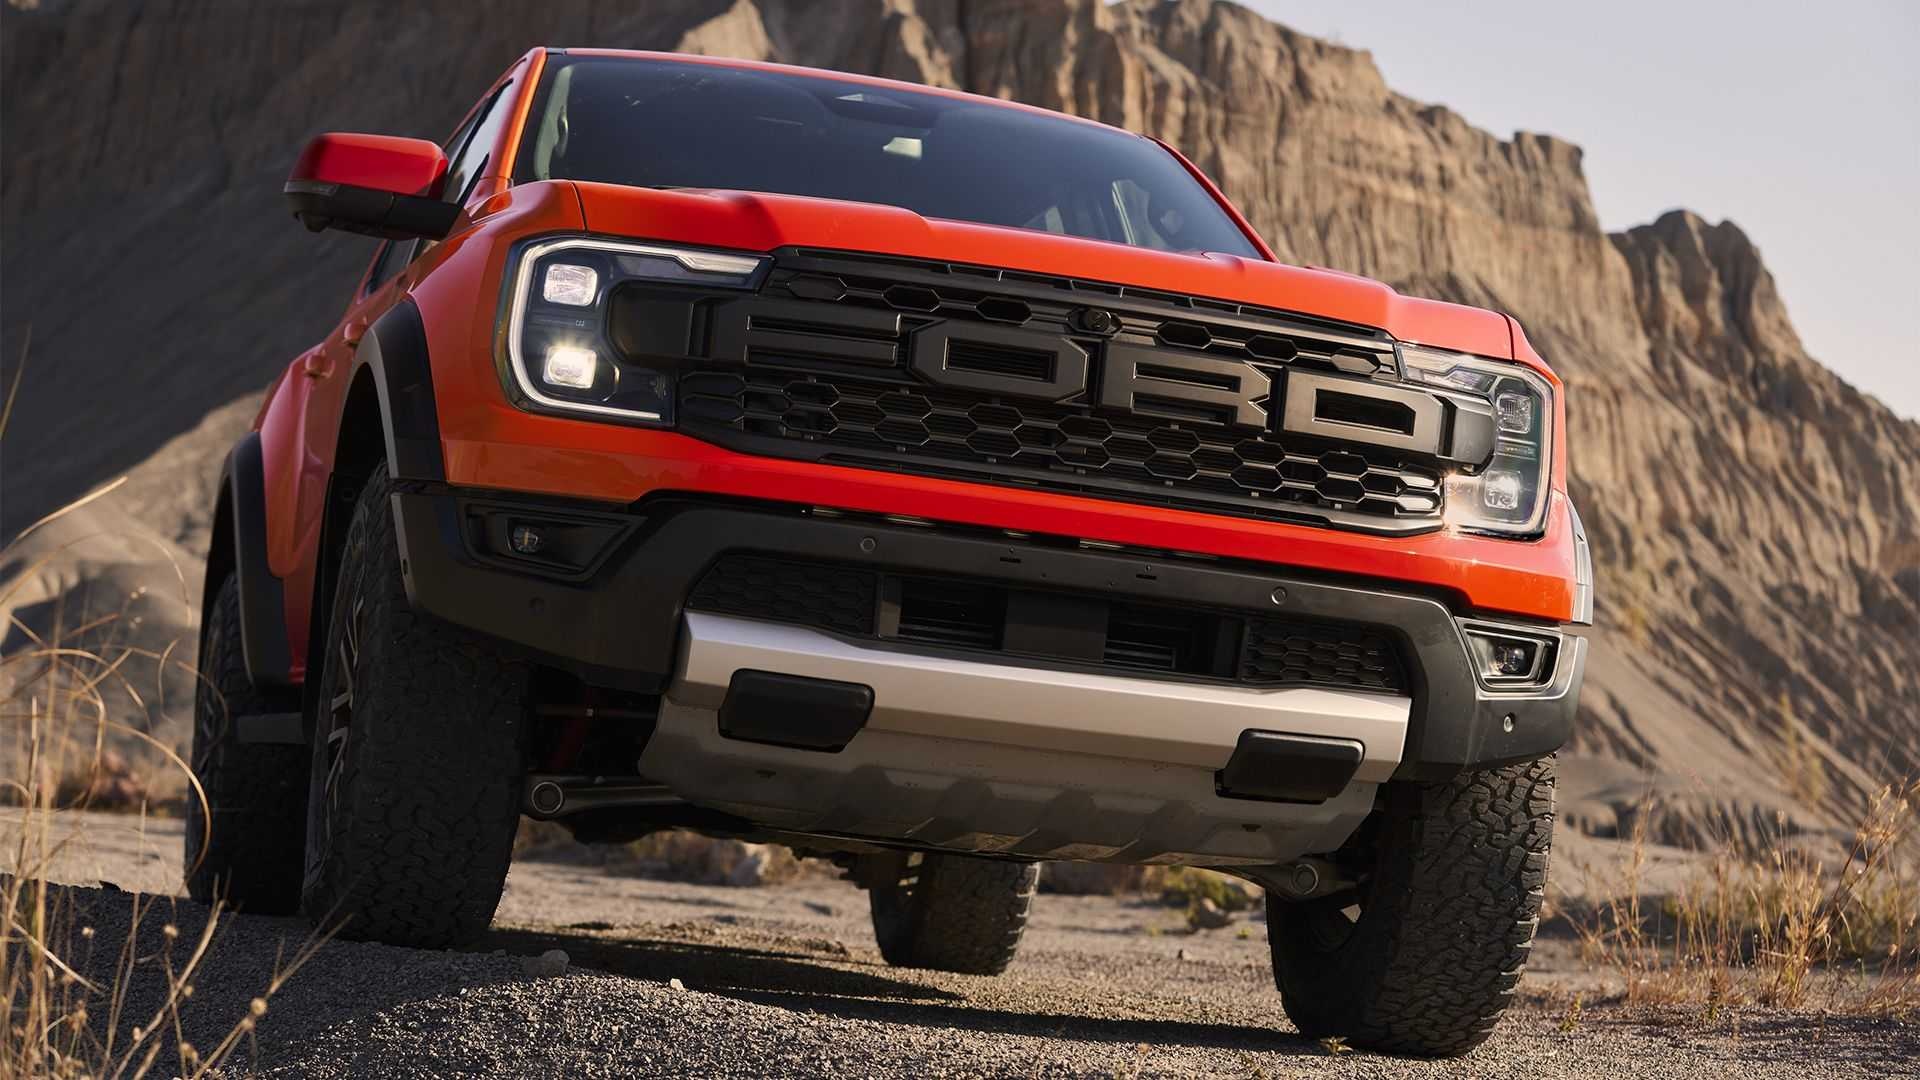 Ford Ranger: Raptor, The first-generation model uses a body-on-frame chassis design. 1920x1080 Full HD Wallpaper.